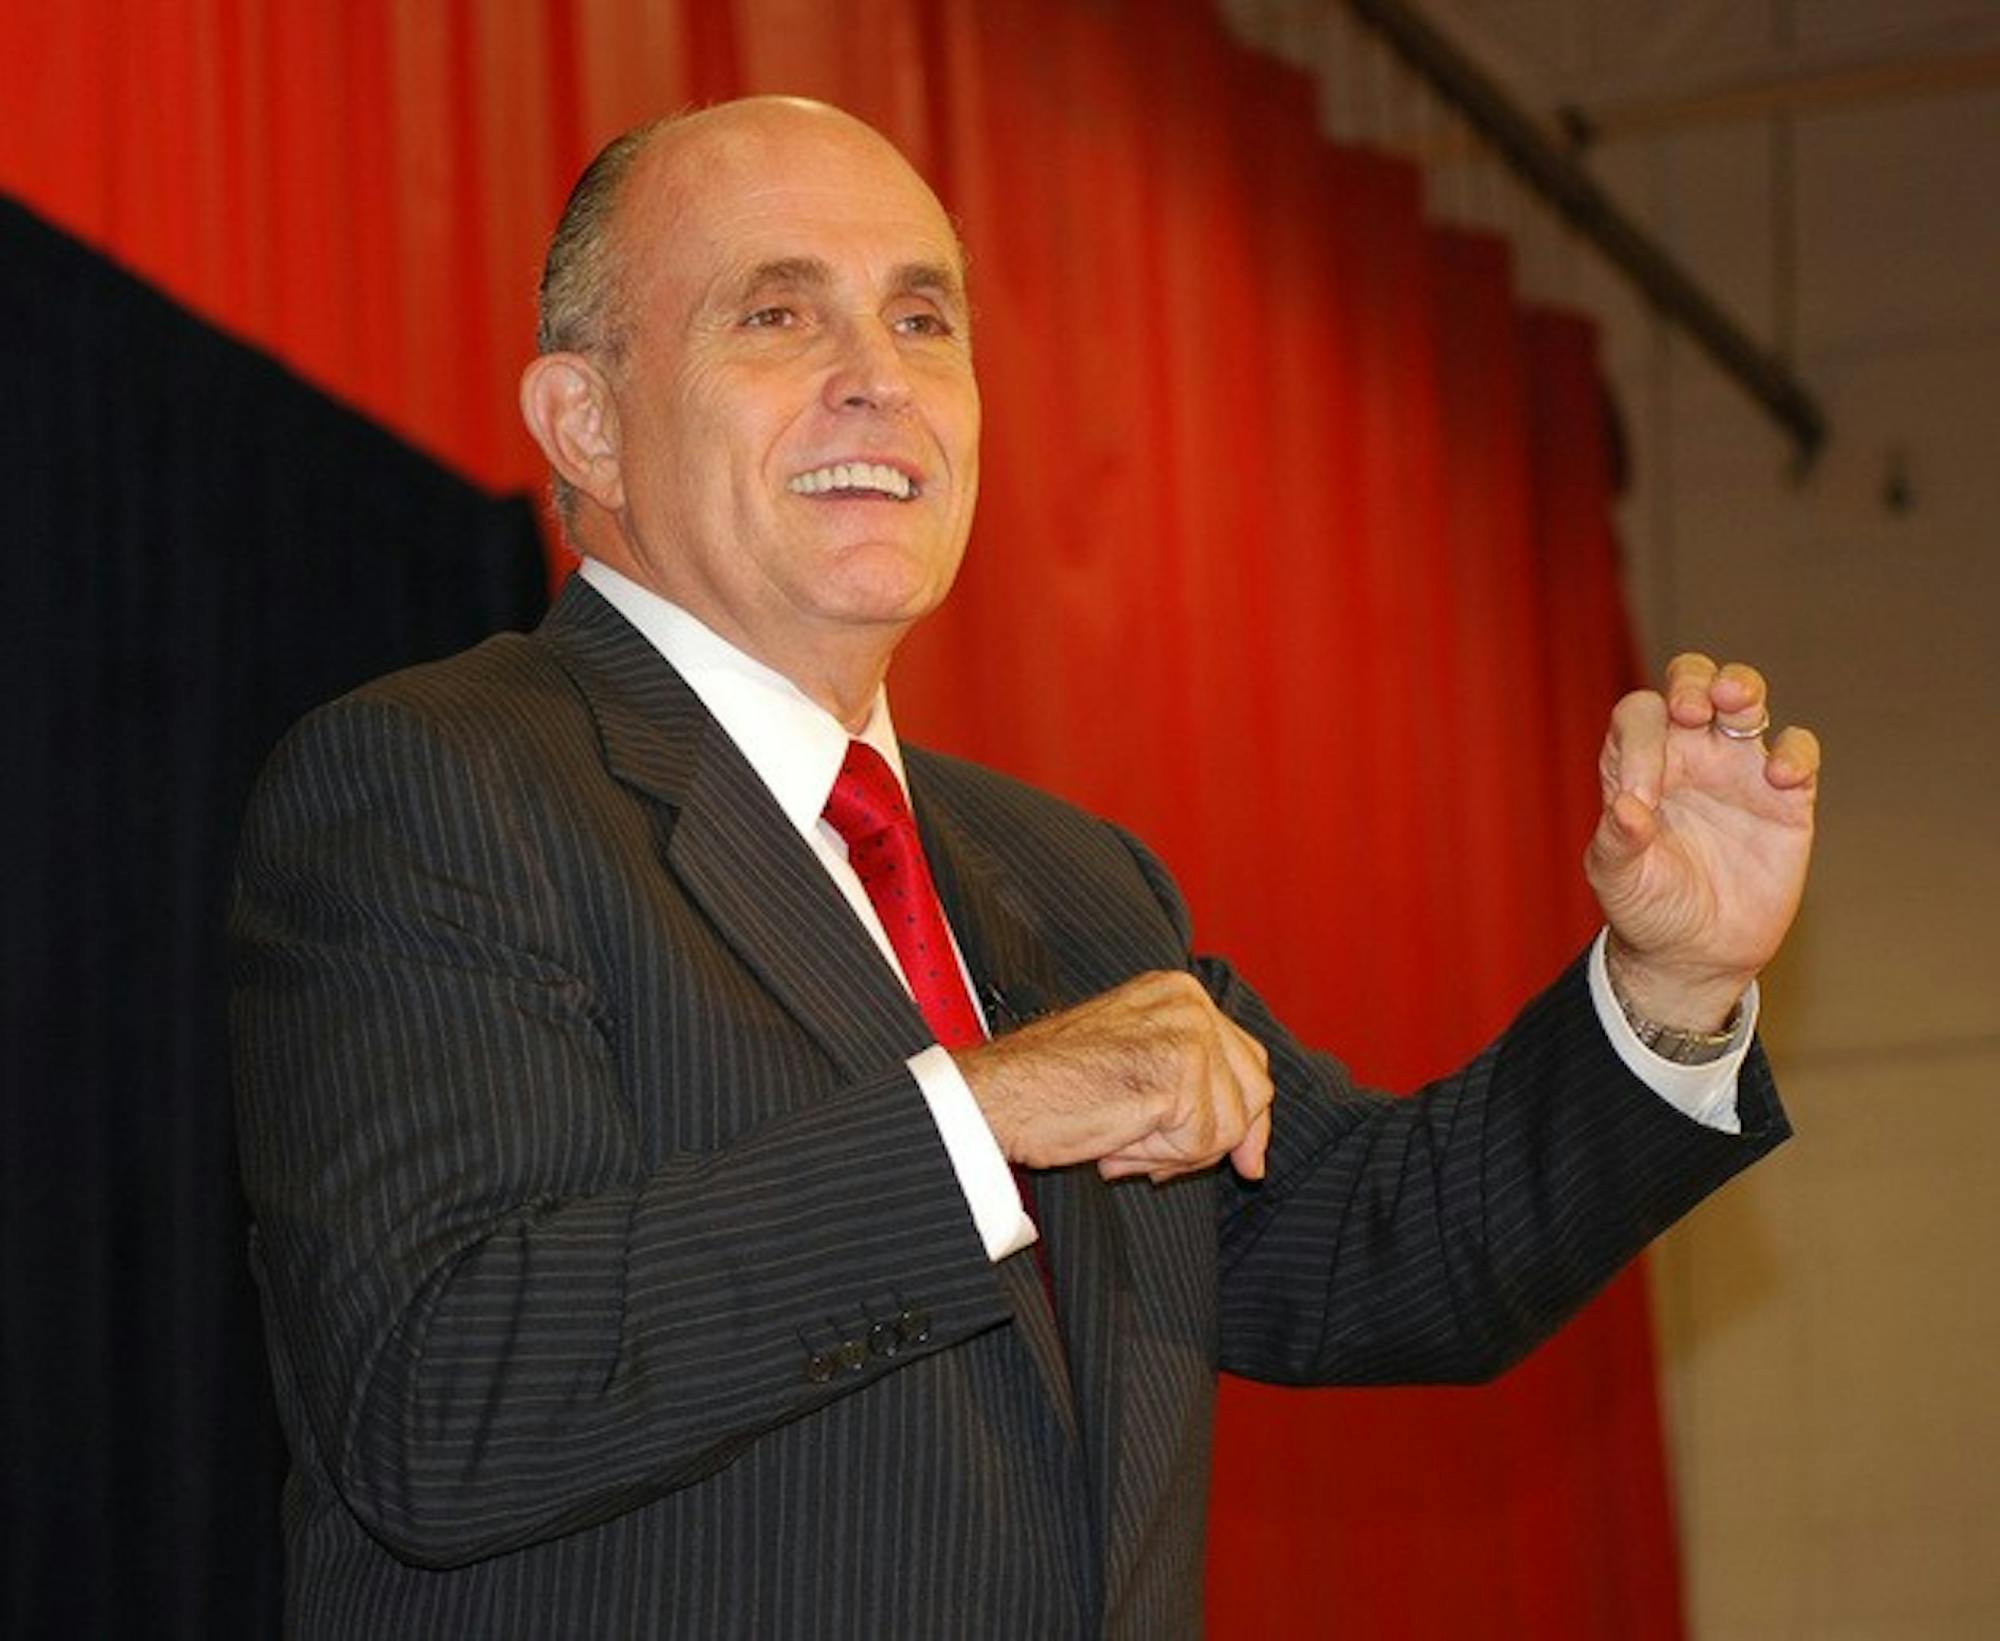 Former New York Mayor and Republican presidential candidate Rudy Giuliani spoke at a town-hall style meeting at Lebanon High School Tuesday.